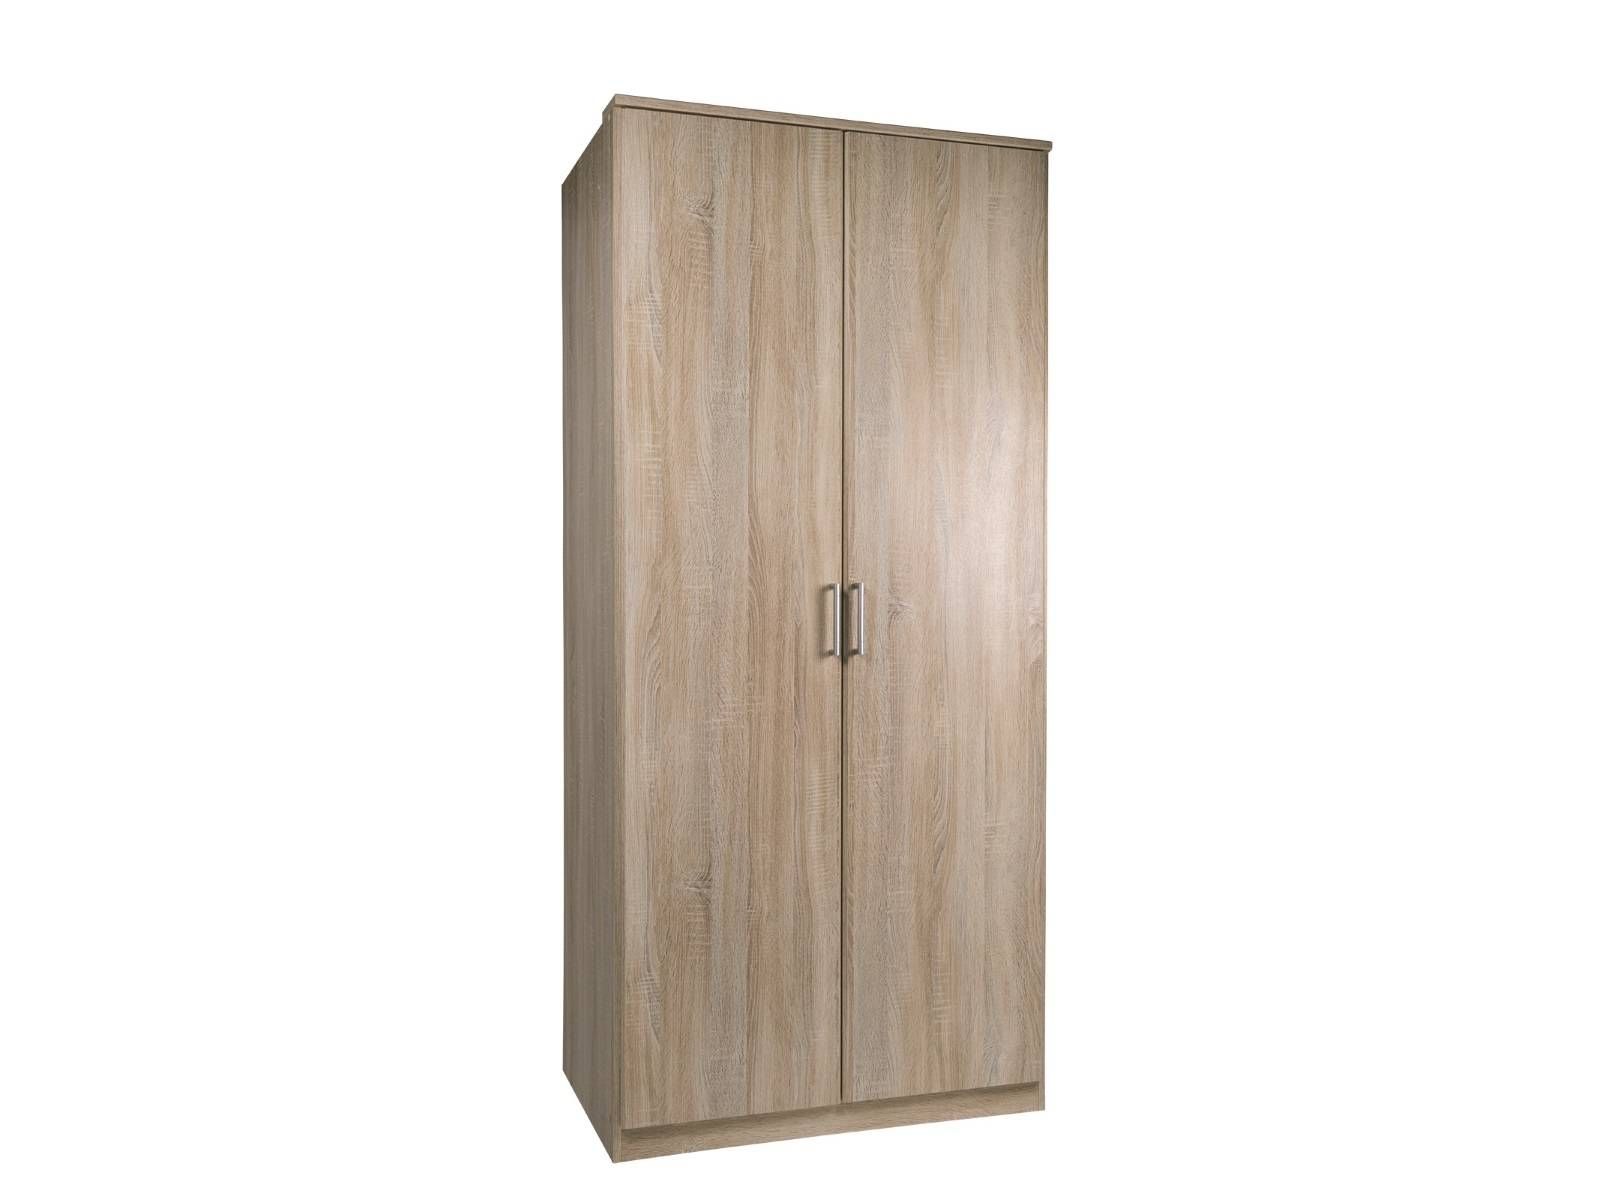 Cheap Wardrobes | Bedroom Furniture For Sale | Double Wardrobe Inside Bargain Wardrobes (Photo 5 of 15)